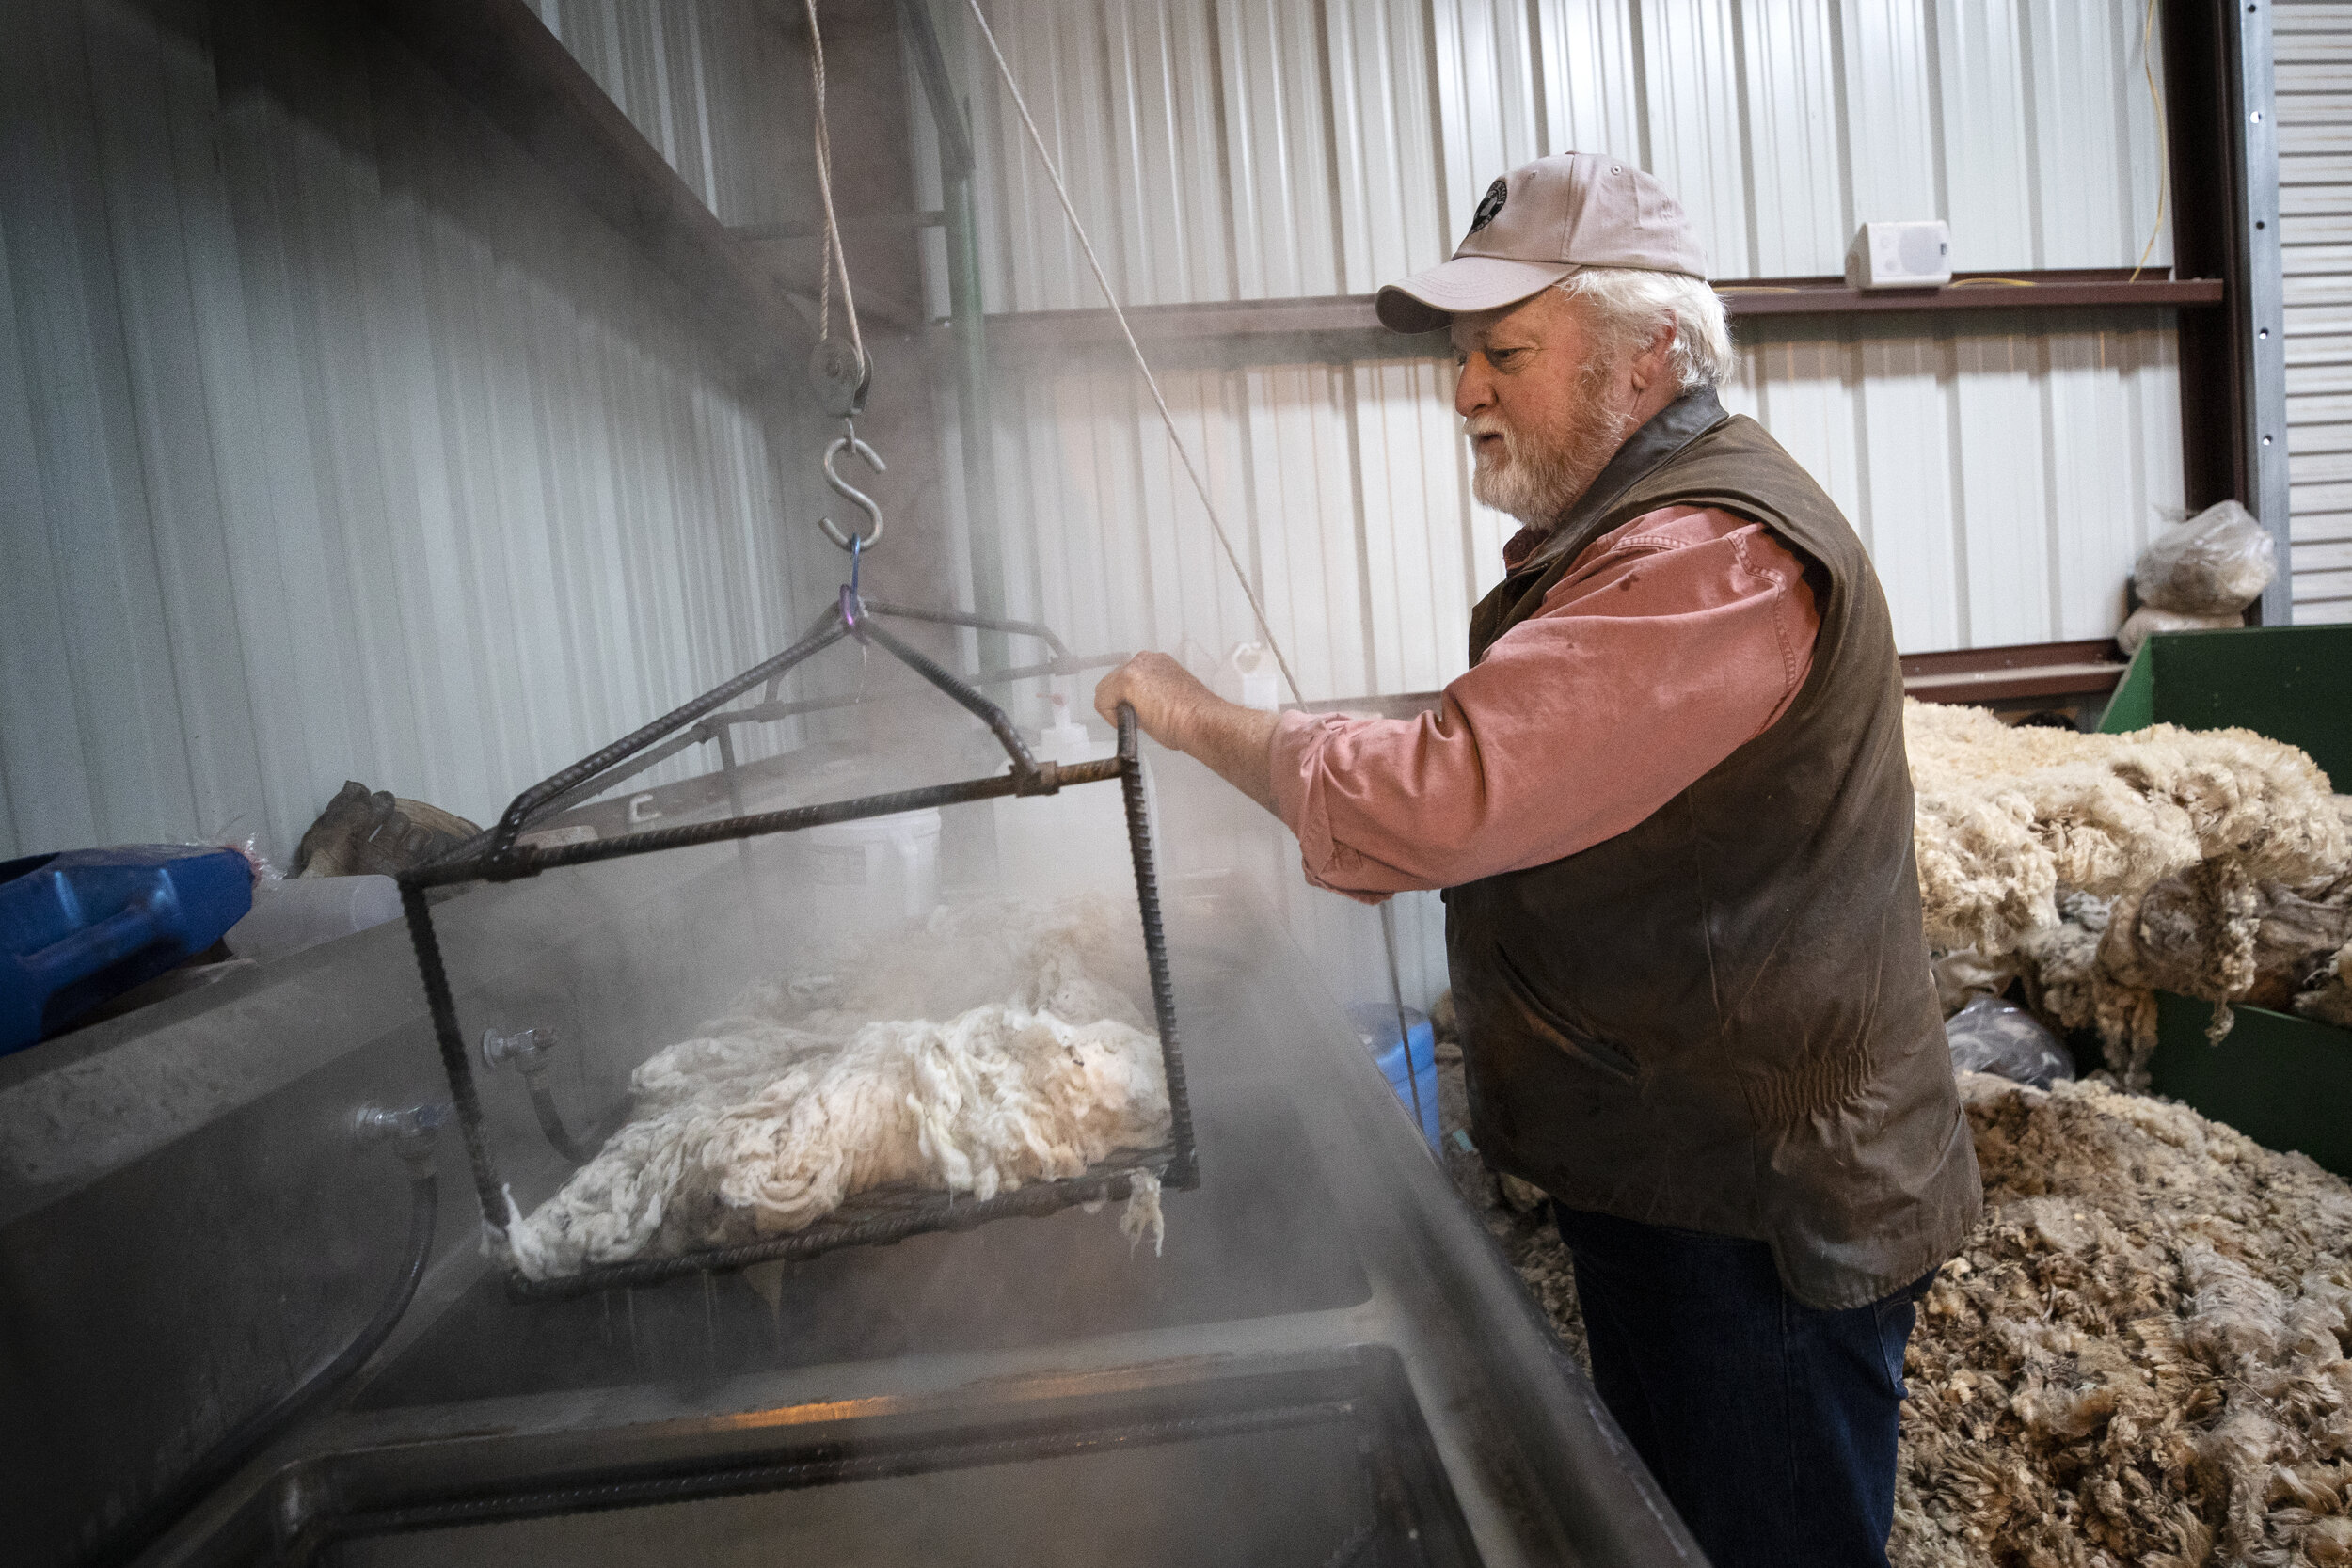  MARATHON, TX. Seth Warnock owns and operates Marathon Basin Wool Mill with his wife, Bonnie. They purchased machinery from the 1950s and taught themselves how to prepare and spin sheep wool, producing high quality wool for sale worldwide. 